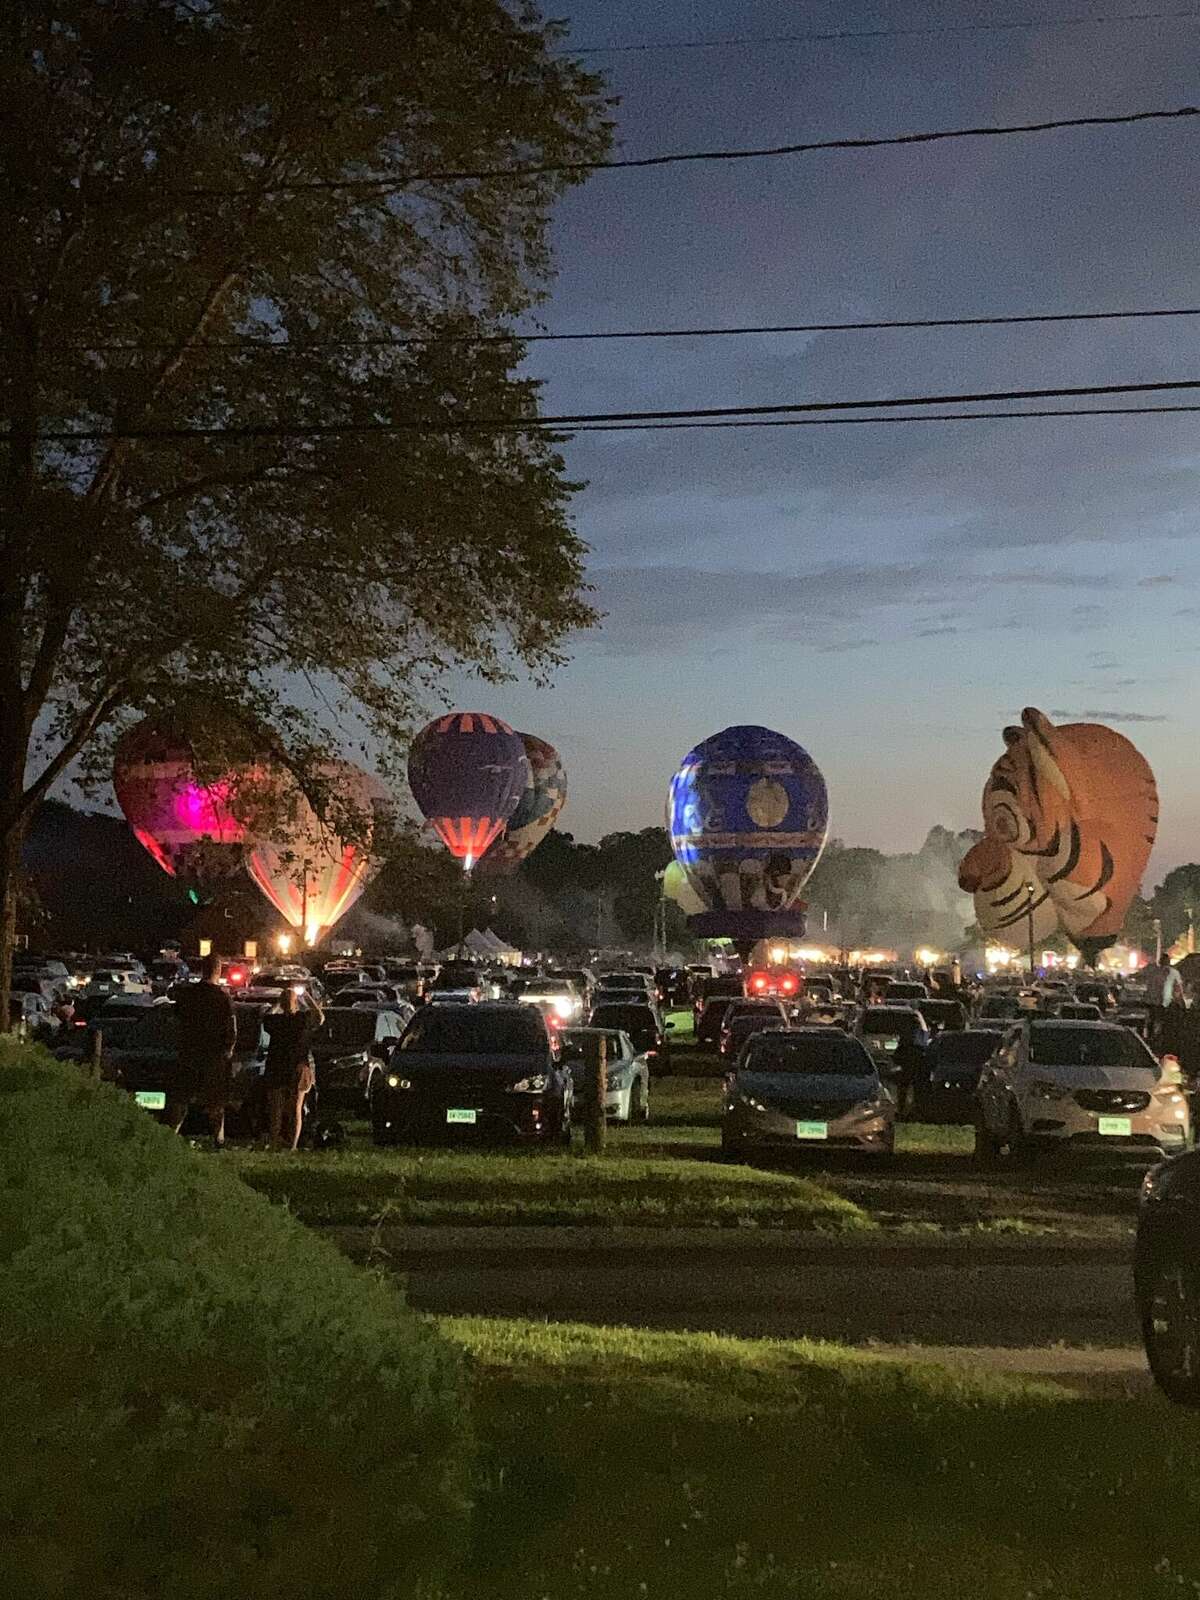 Man hospitalized after falling out of hot air balloon, police say